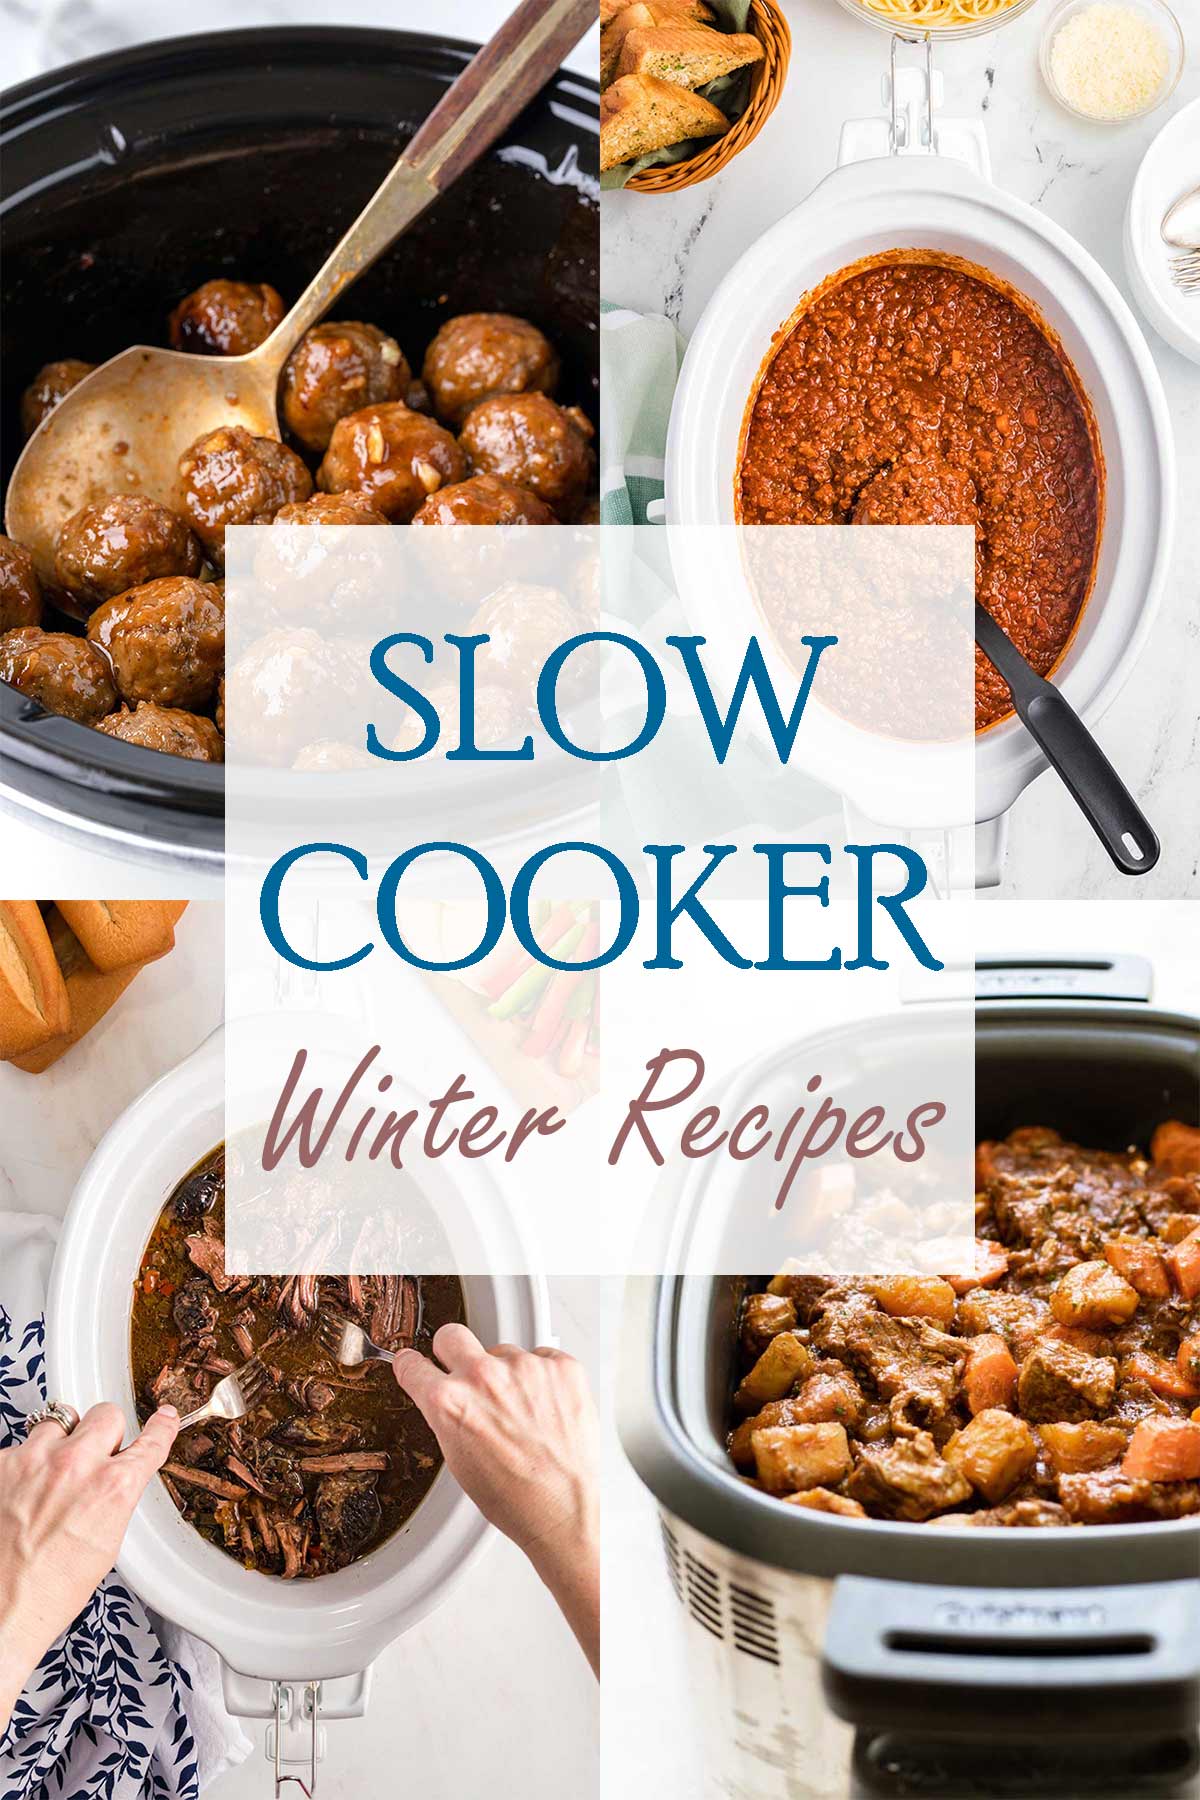 Crockpot Appetizers - Make Ahead Party Food Recipes For Slow Cookers